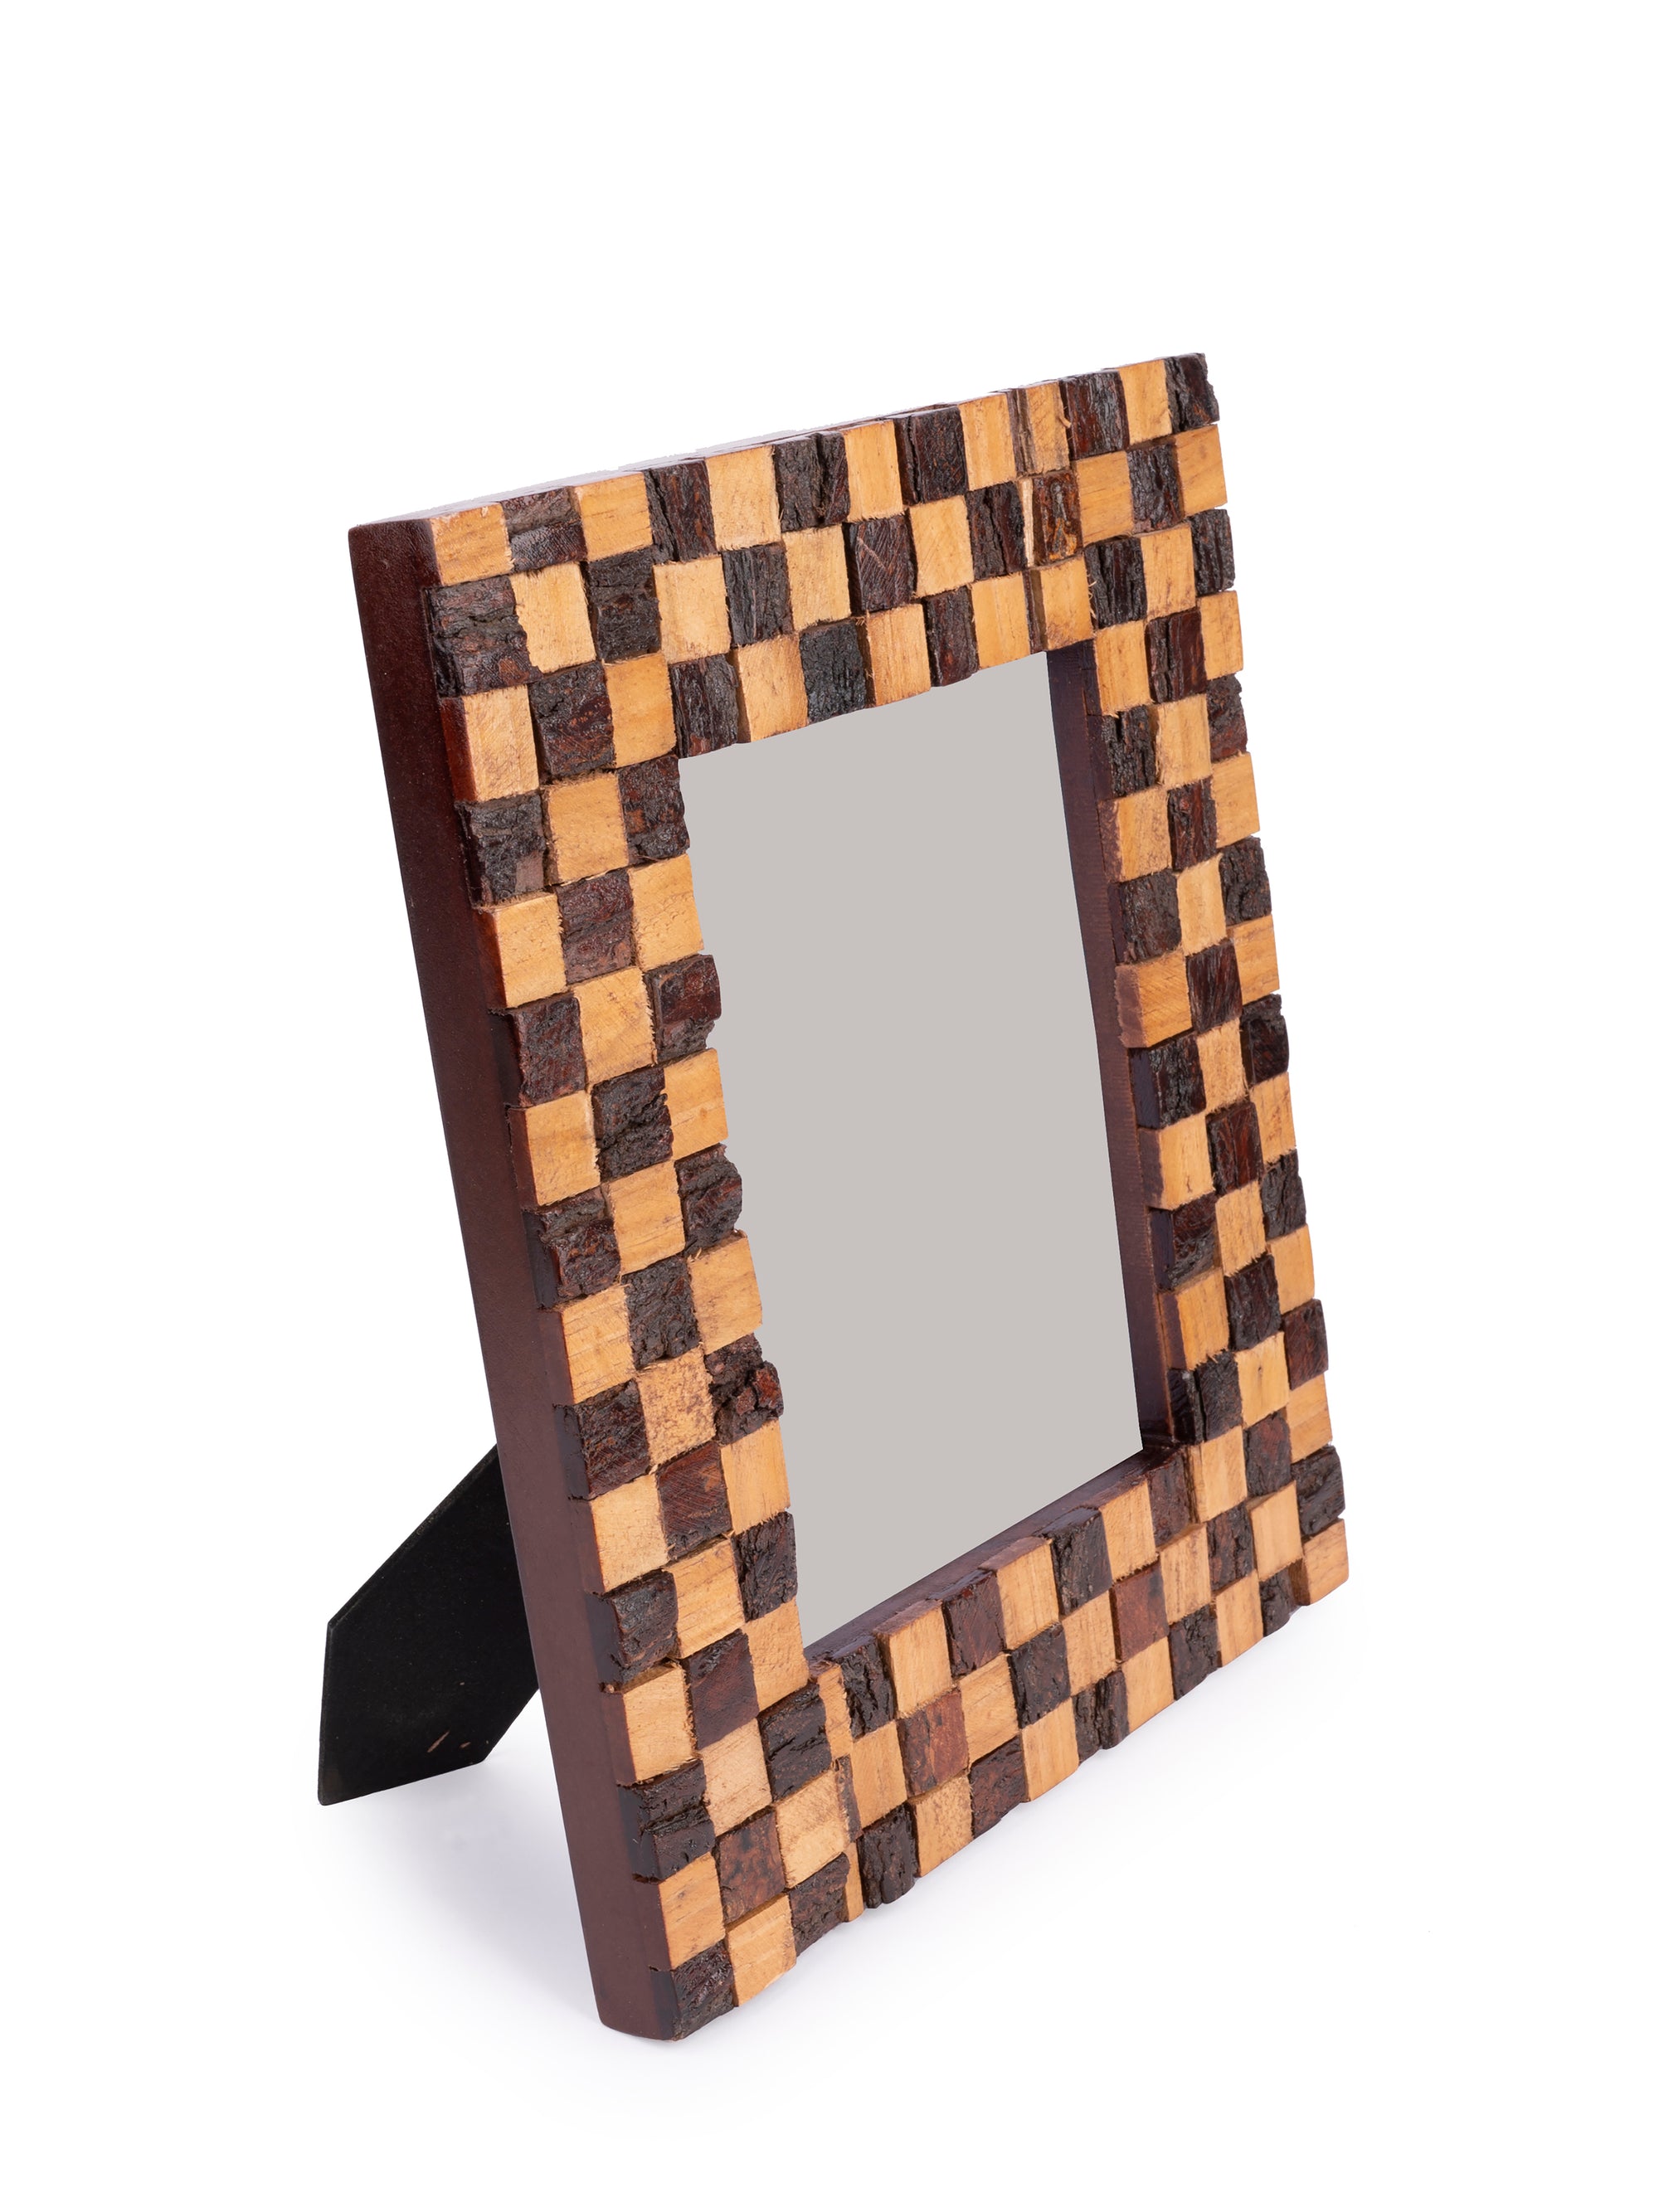 Bamboo Work Table Top Photo Frame in Chequered design - Photo size 14x20 cms - The Heritage Artifacts